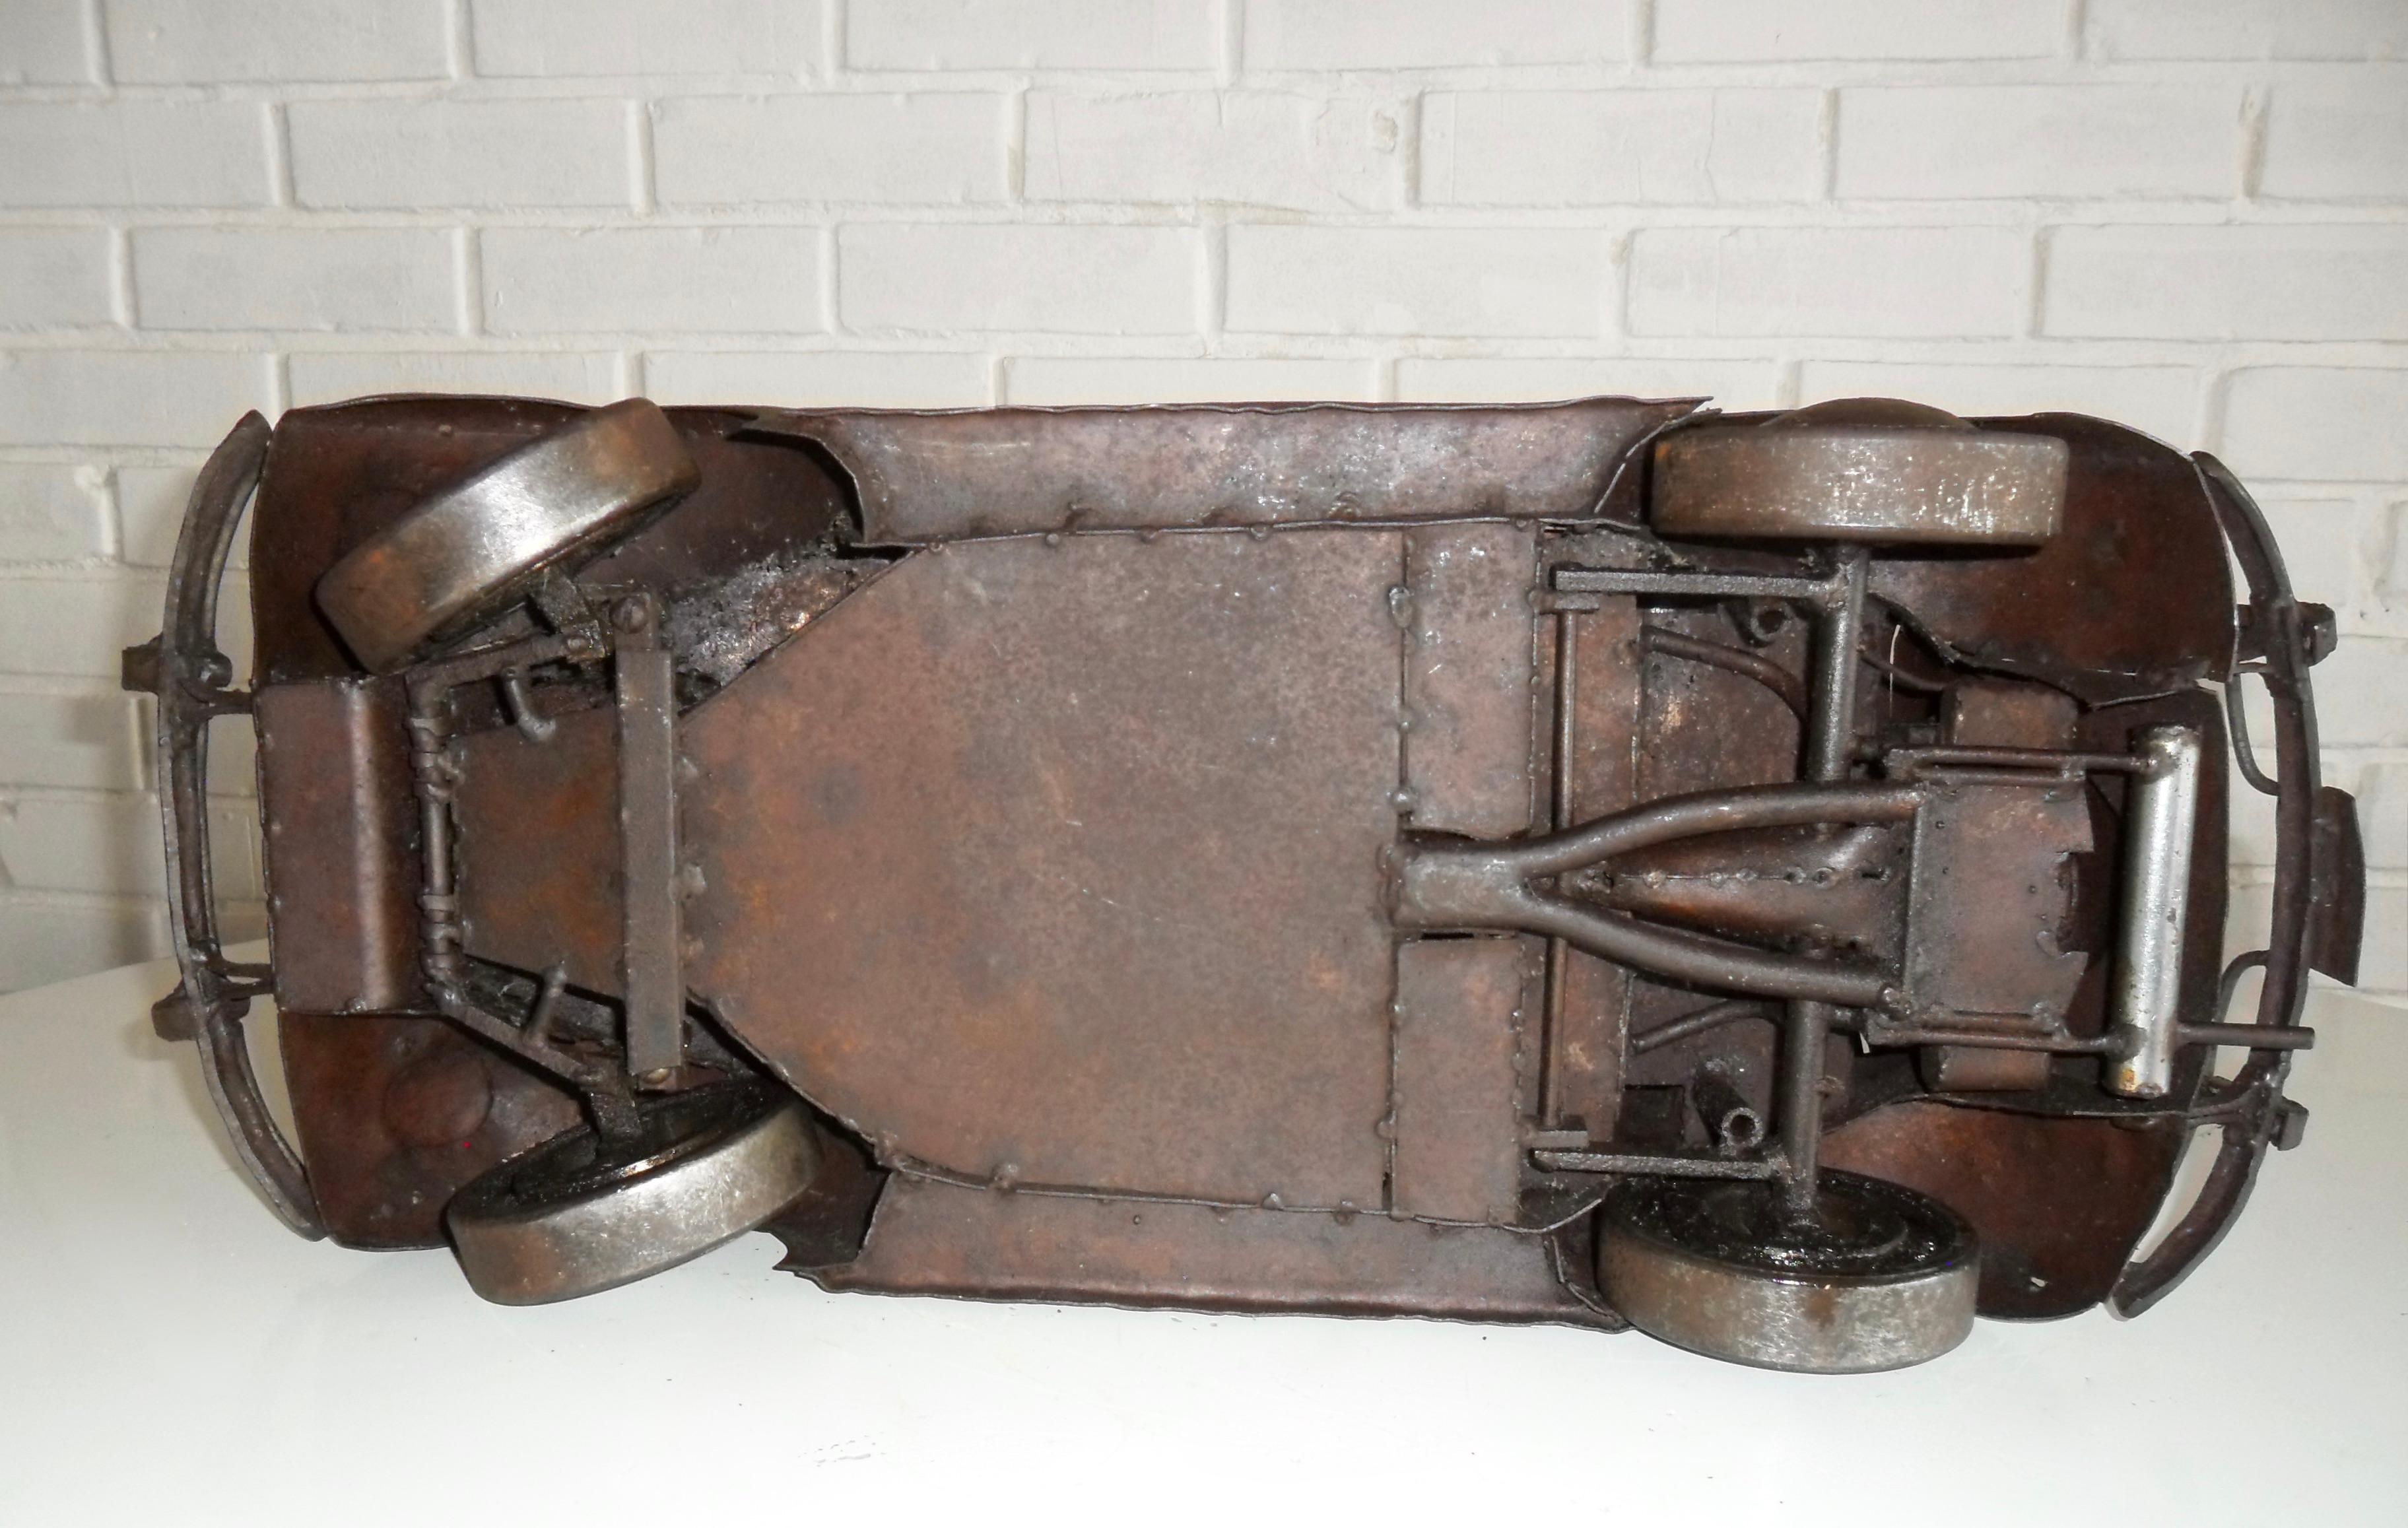 Brutalist VW Beetle  Metal Sculpture by Antonio Fortanel, Mexico, 1960s For Sale 1